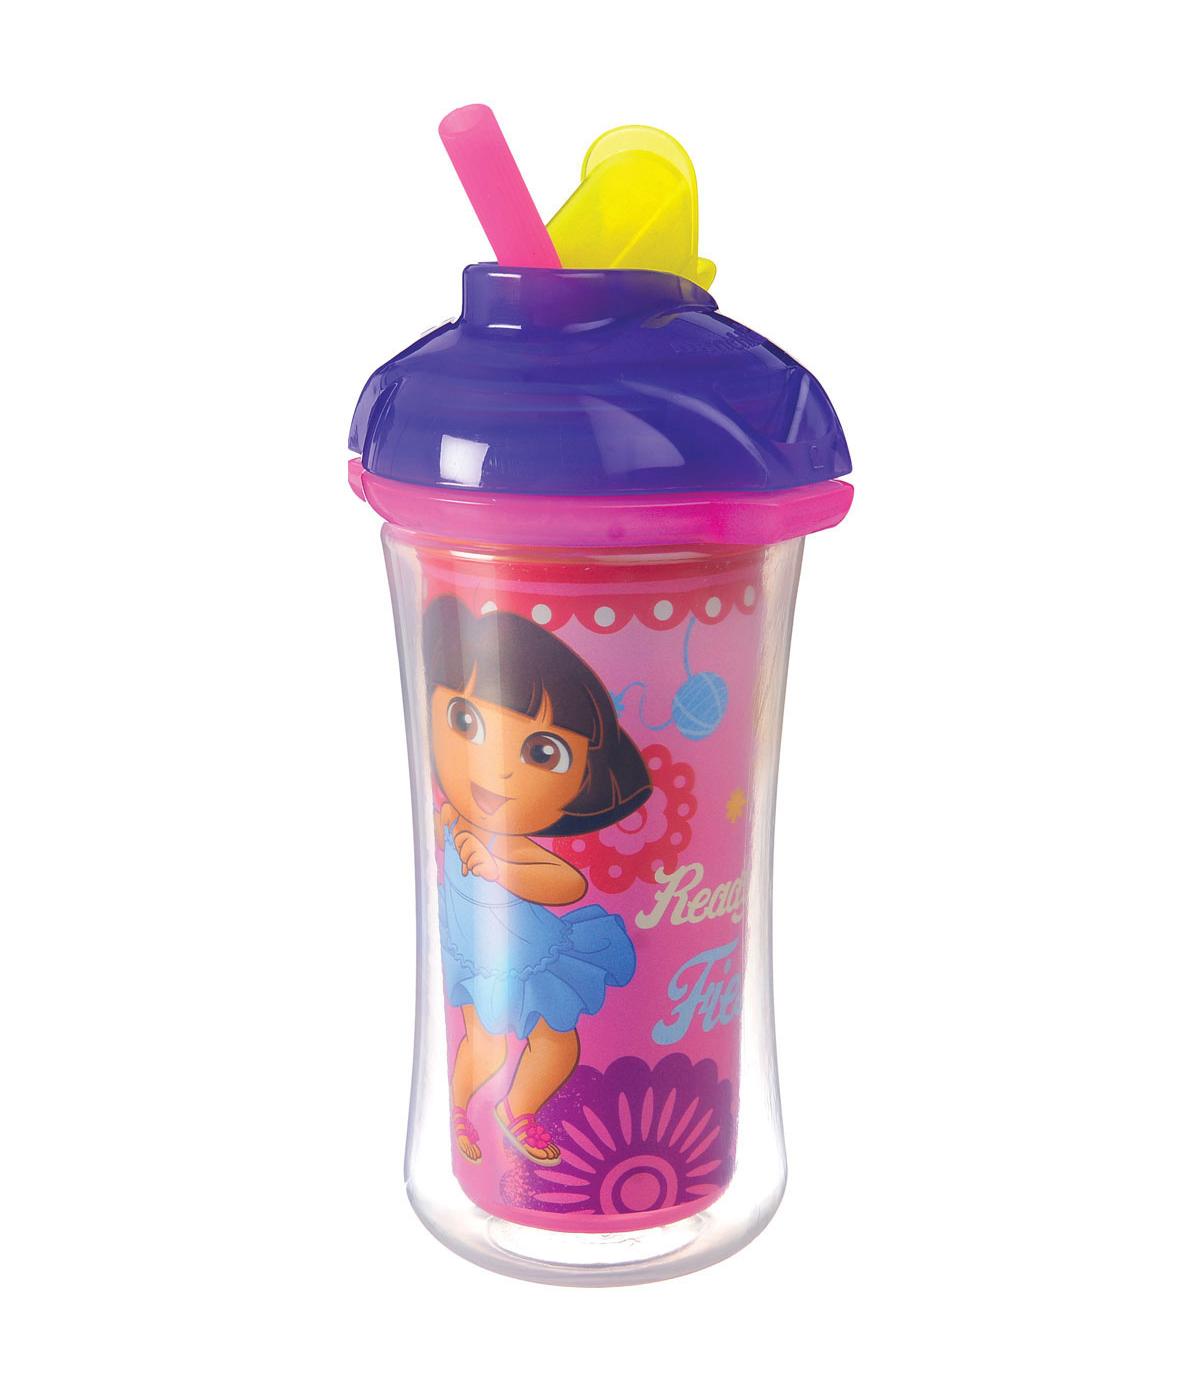 Munchkin Nickelodeon Dora the Explorer Insulated Straw Cup 12 +M, Assorted Colors; image 1 of 3